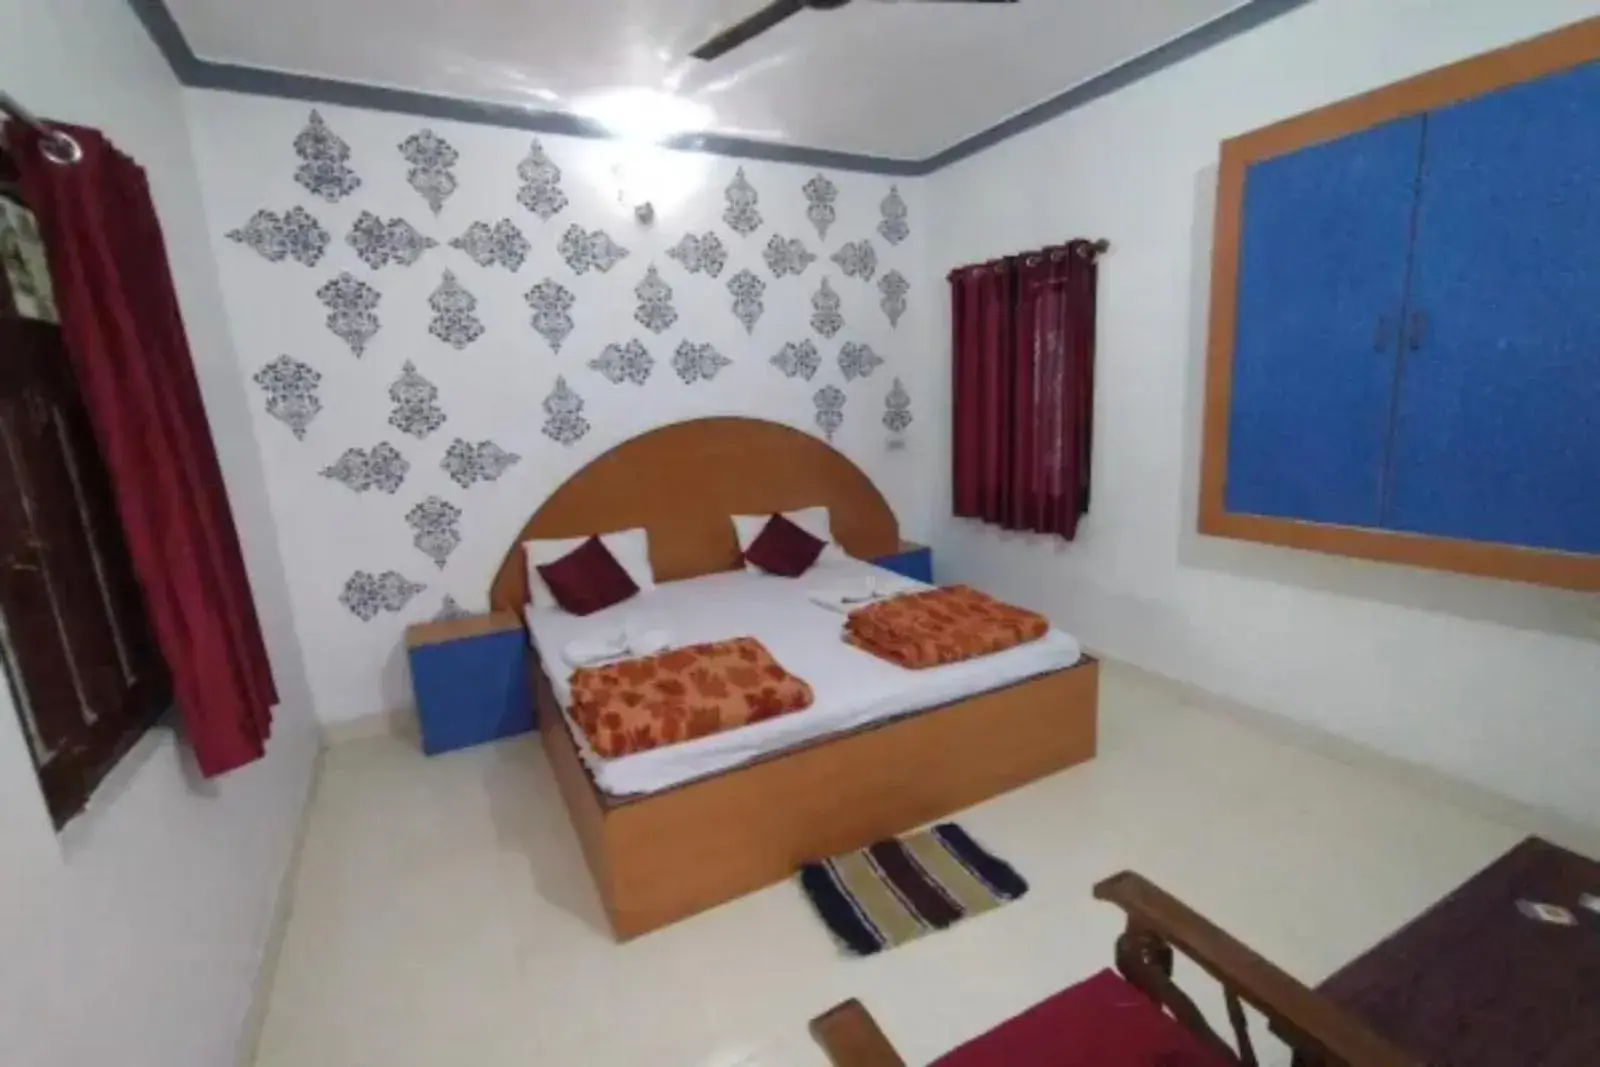 Bed in GRG Mohit Paying Guest House Varanasi